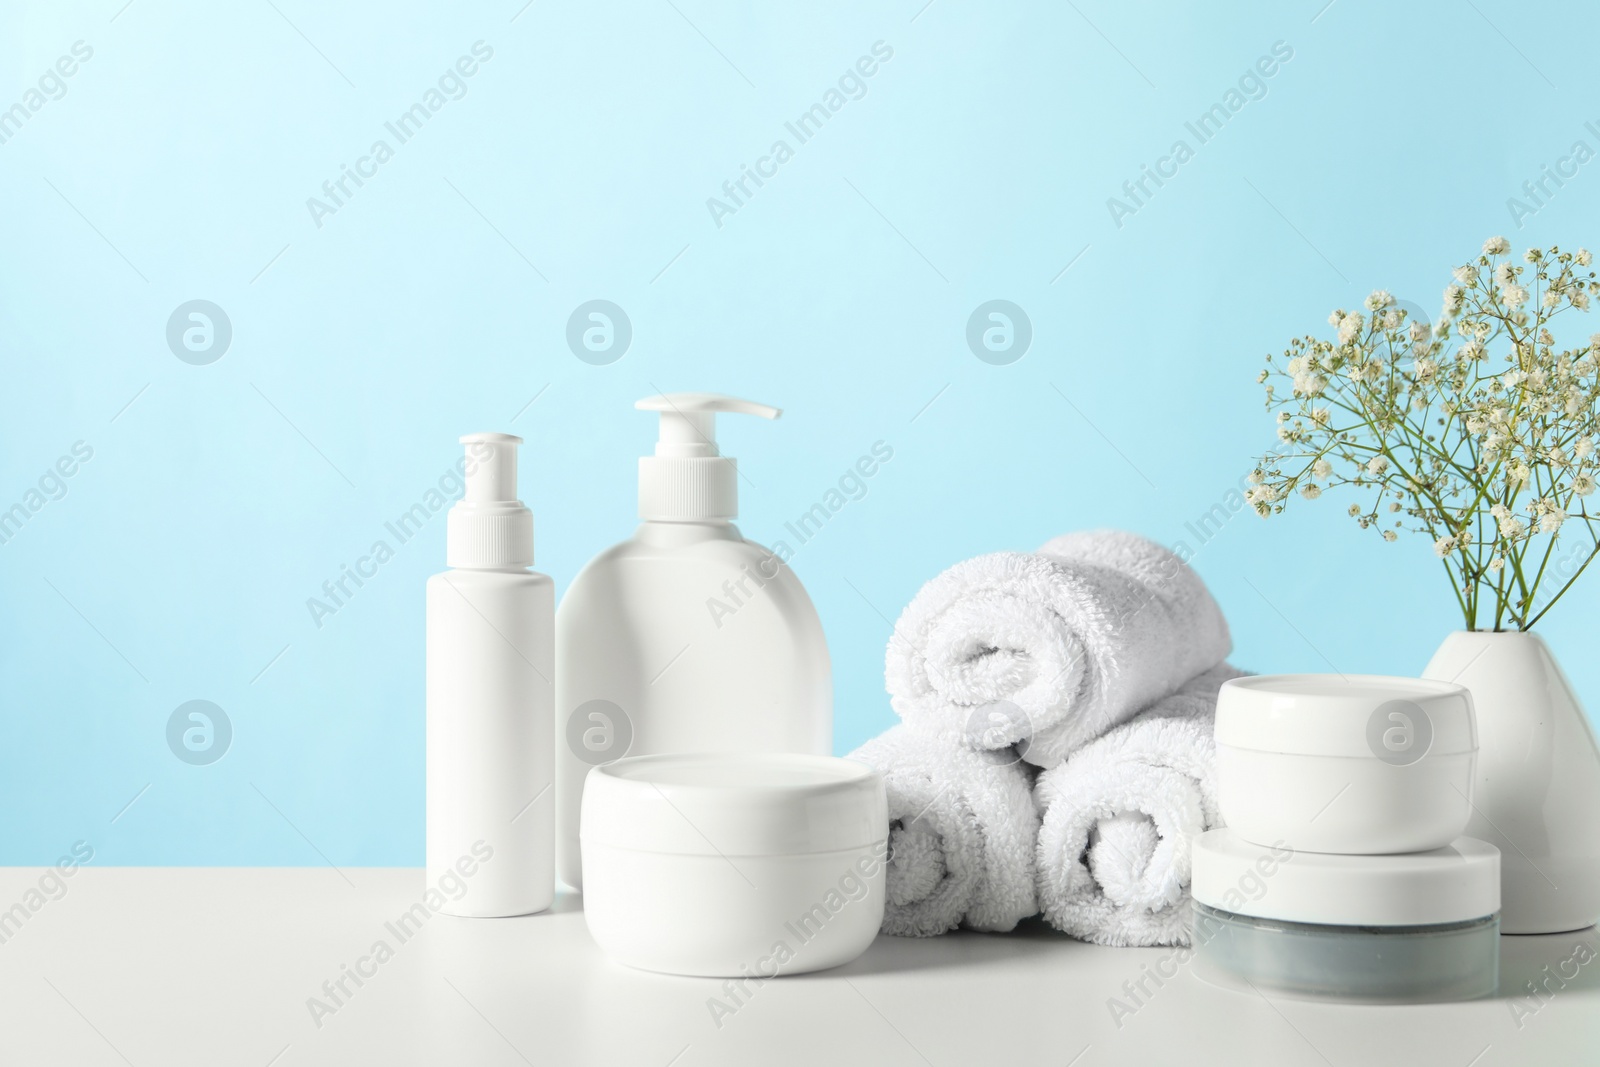 Photo of Different bath accessories and gypsophila on white table against light blue background